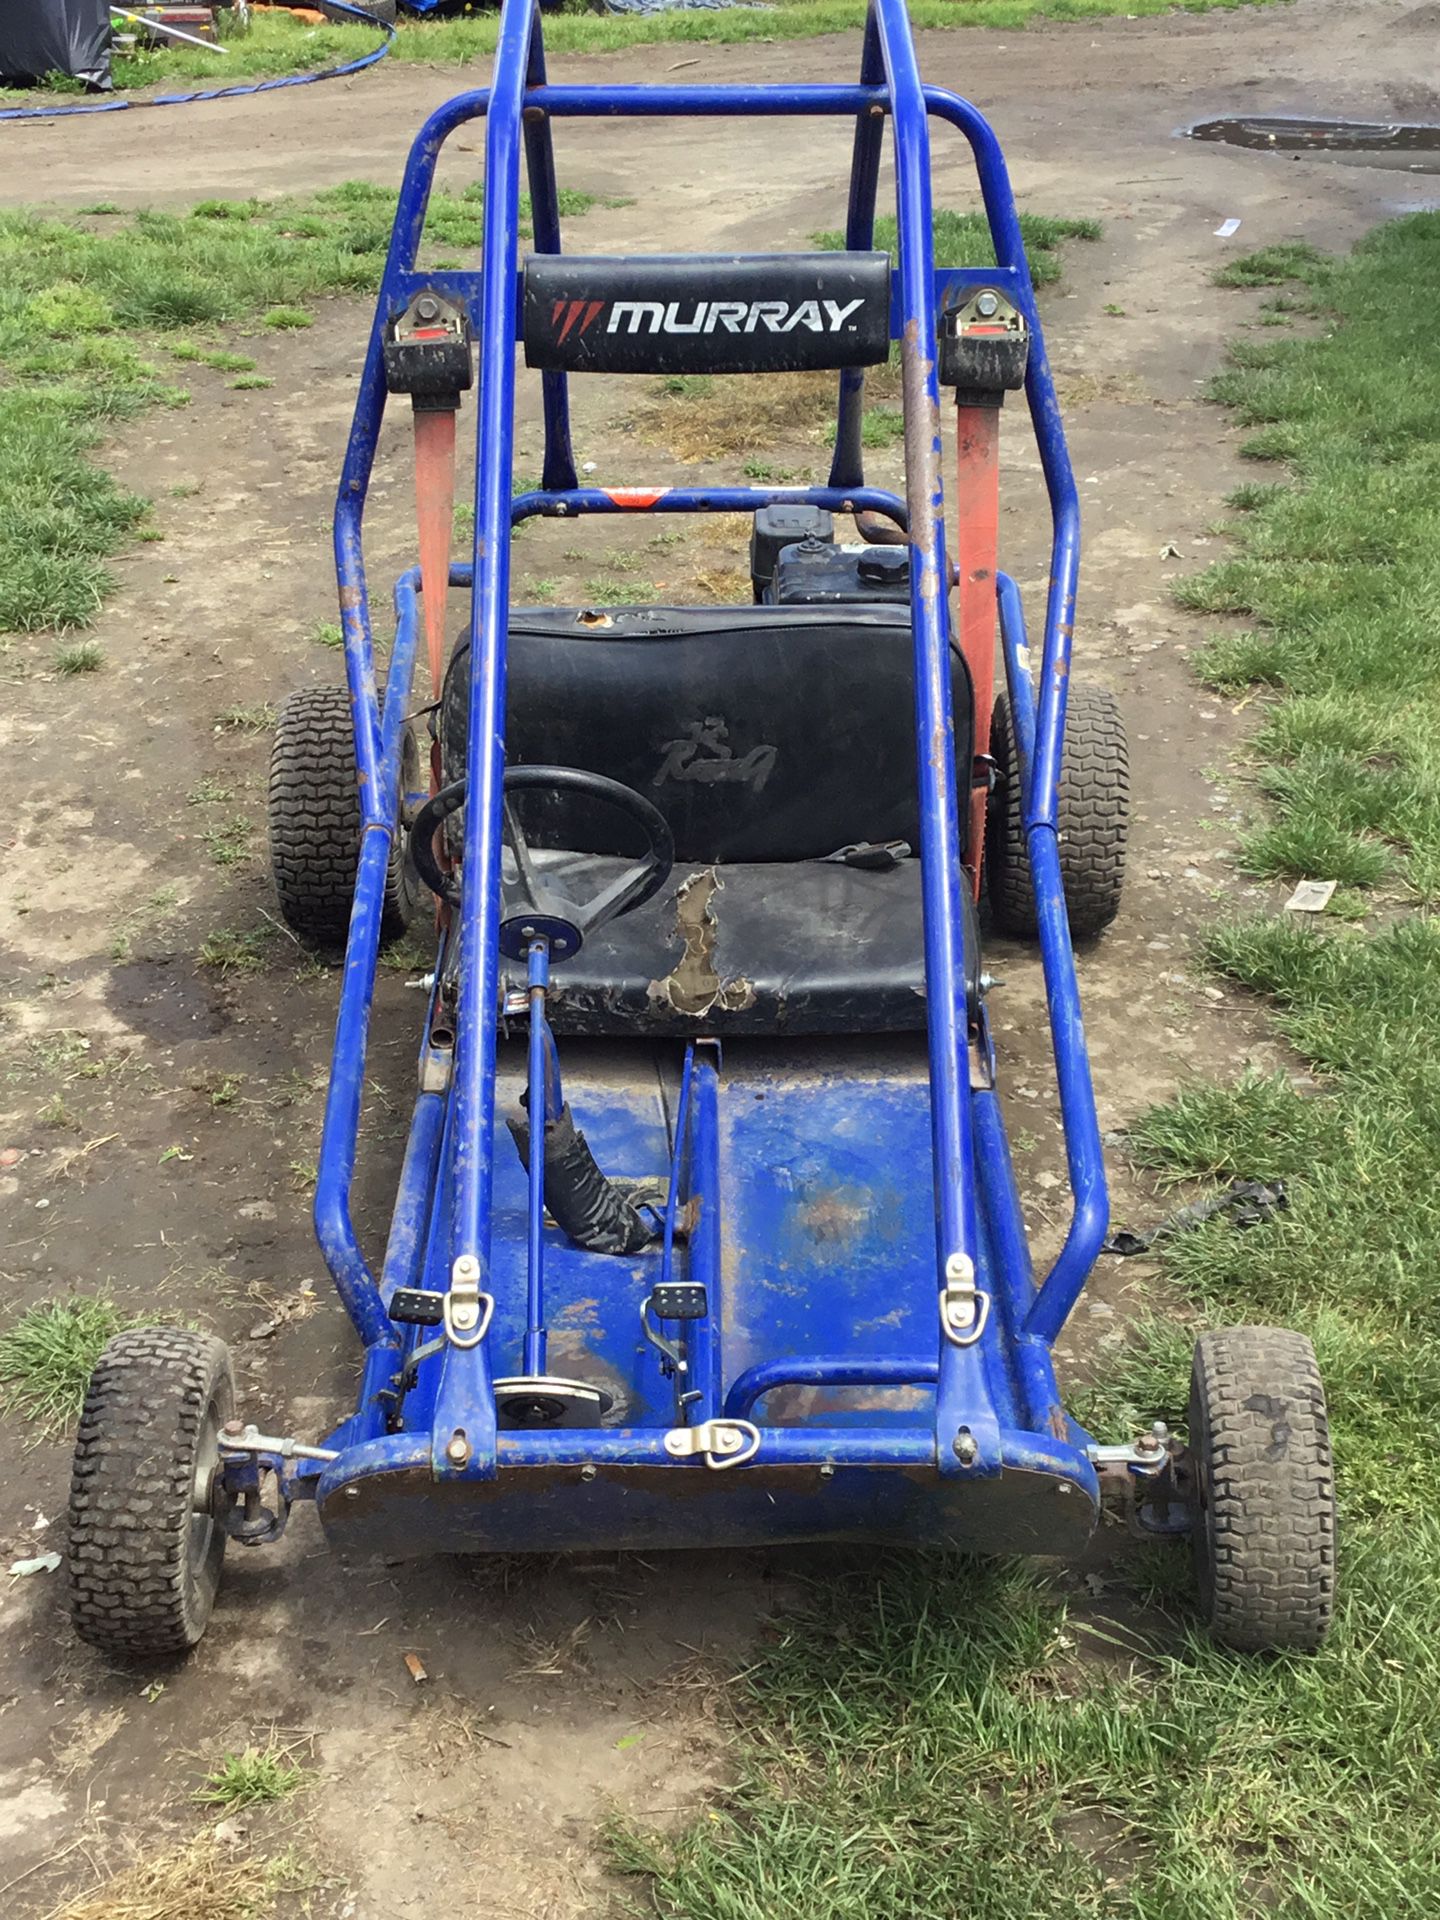 2 seater Live axle go kart 6hp with header and jet kit I have tires and new clutch go with it Fast will pull 300 pounds around like rag doll All nee